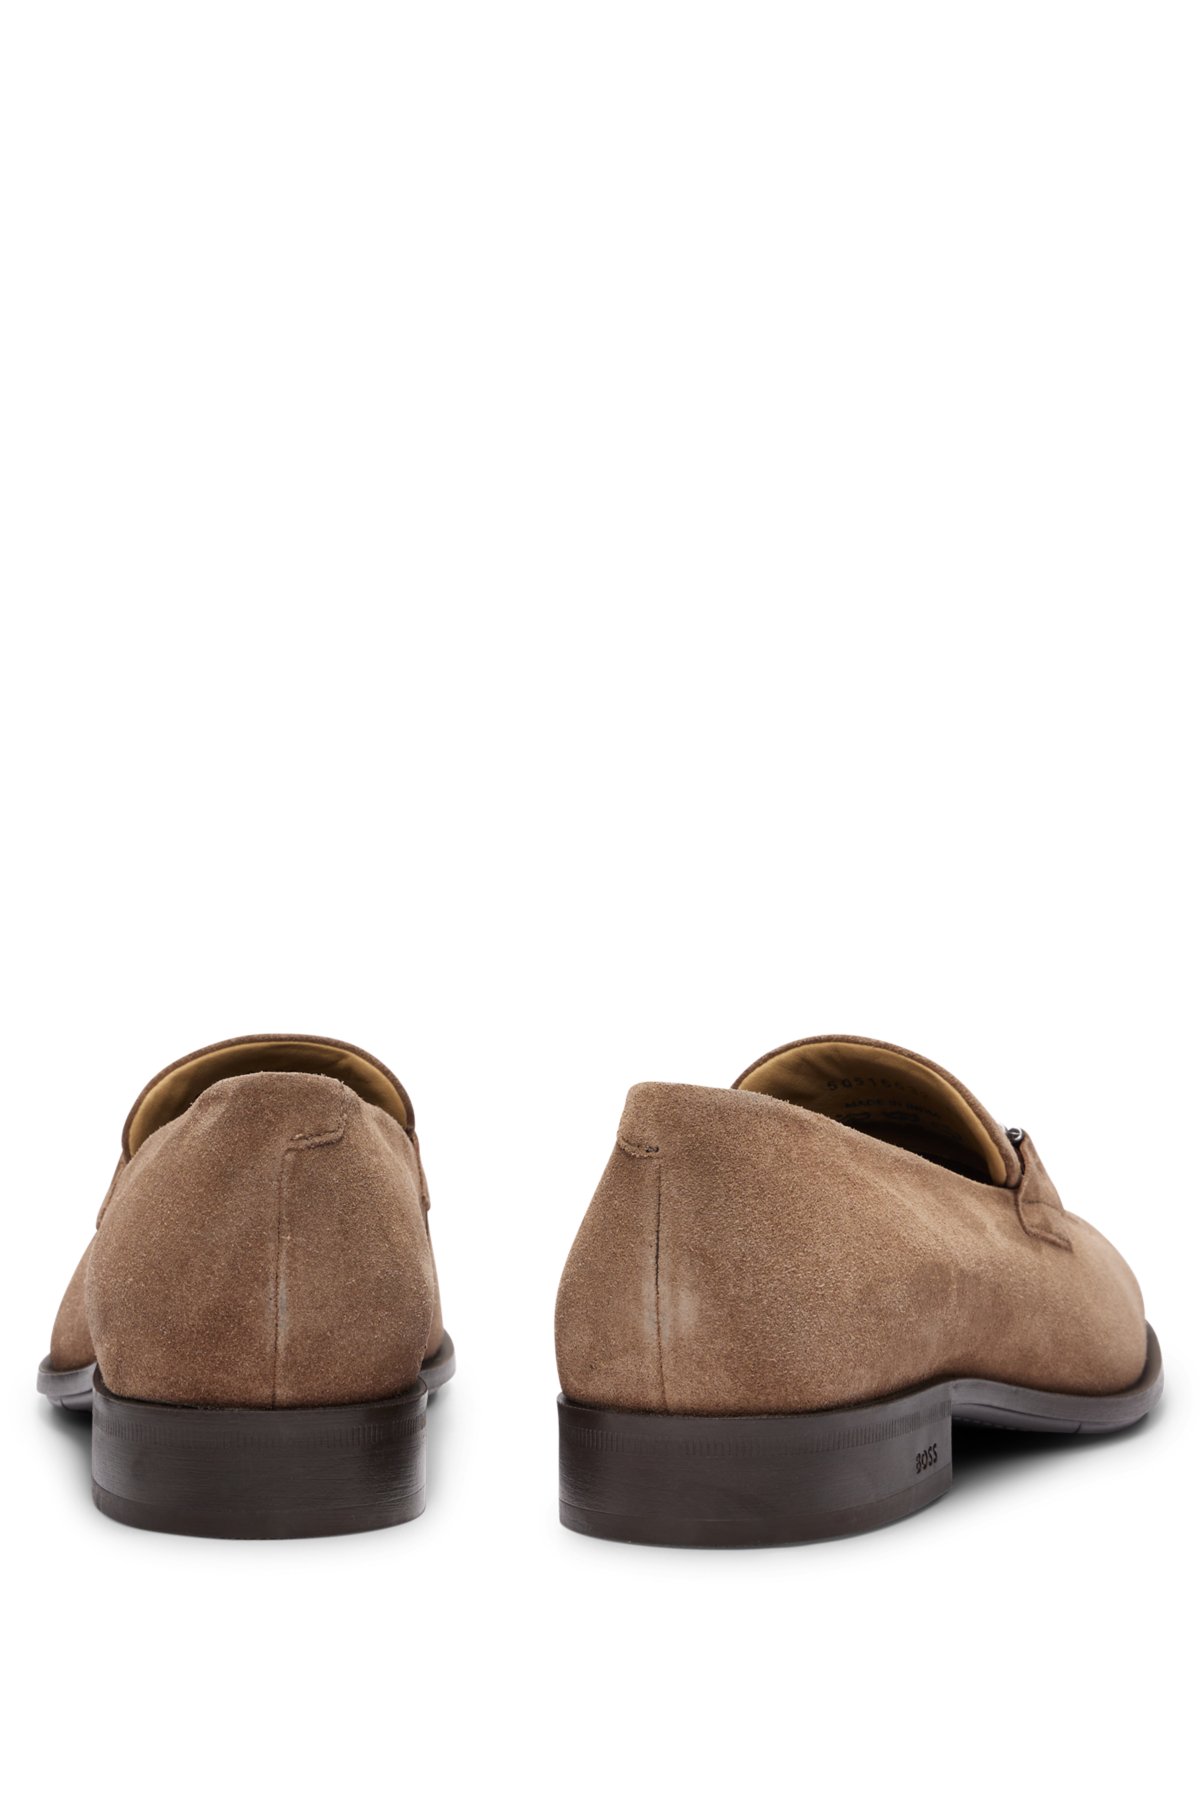 Suede loafers with branded hardware trim, Beige